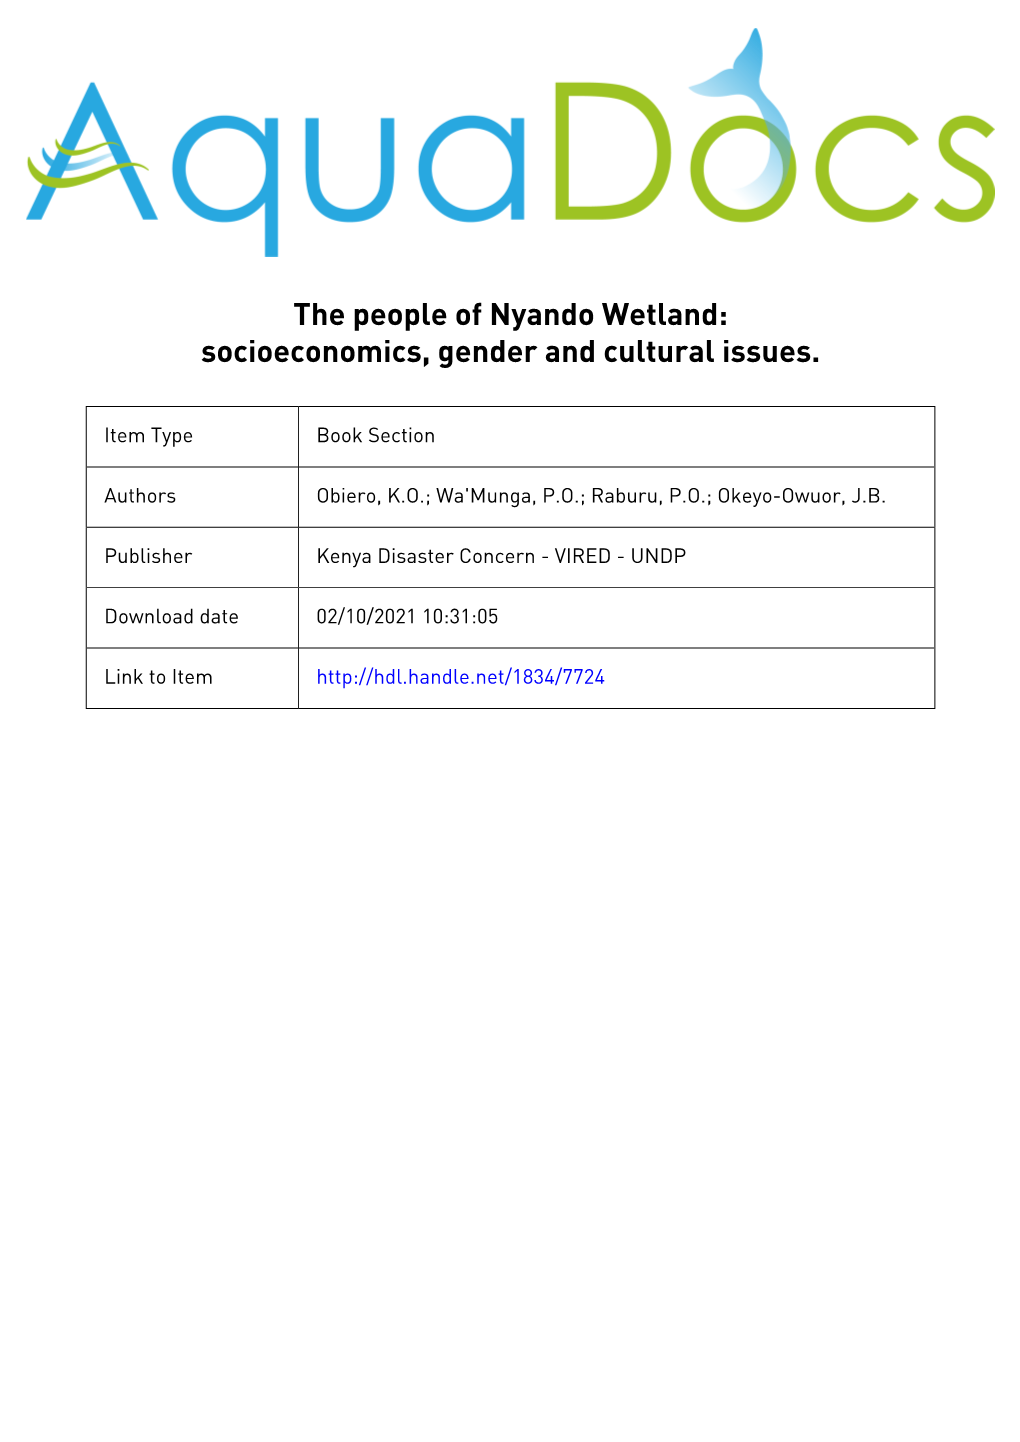 The People of Nyando Wetland: Socioeconomics, Gender and Cultural Issues